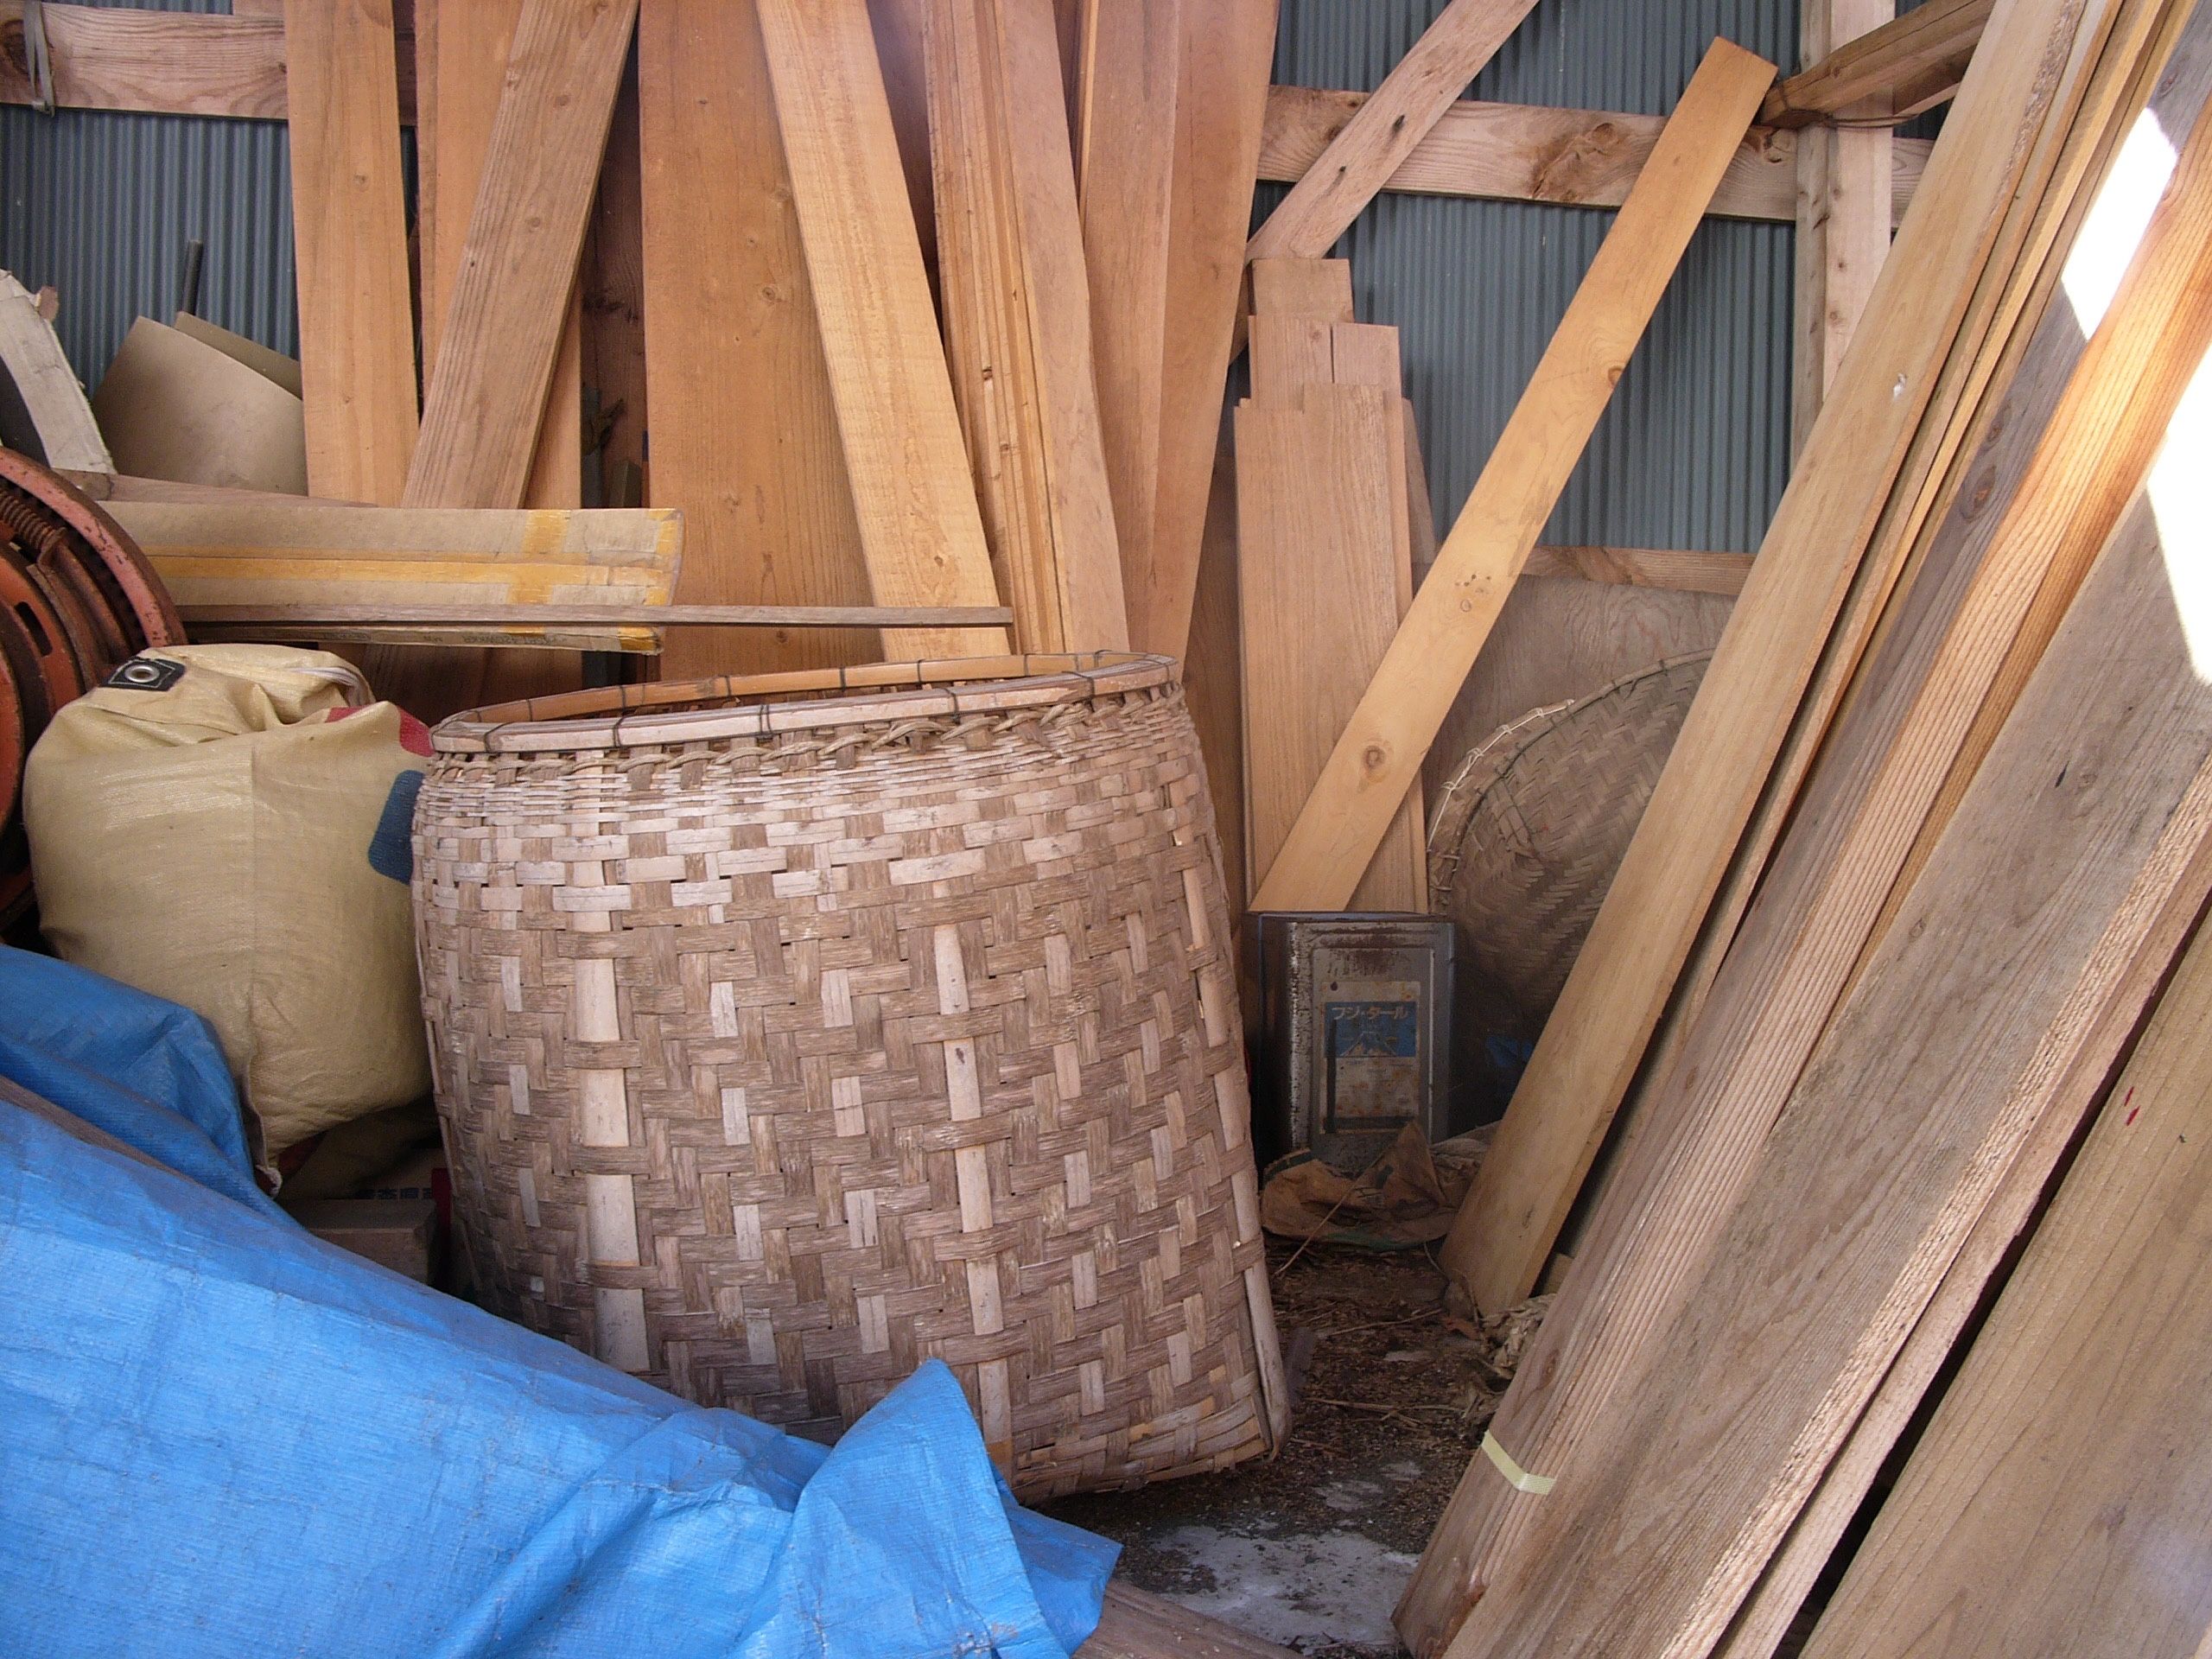 A woven basket and some planks in a shed.